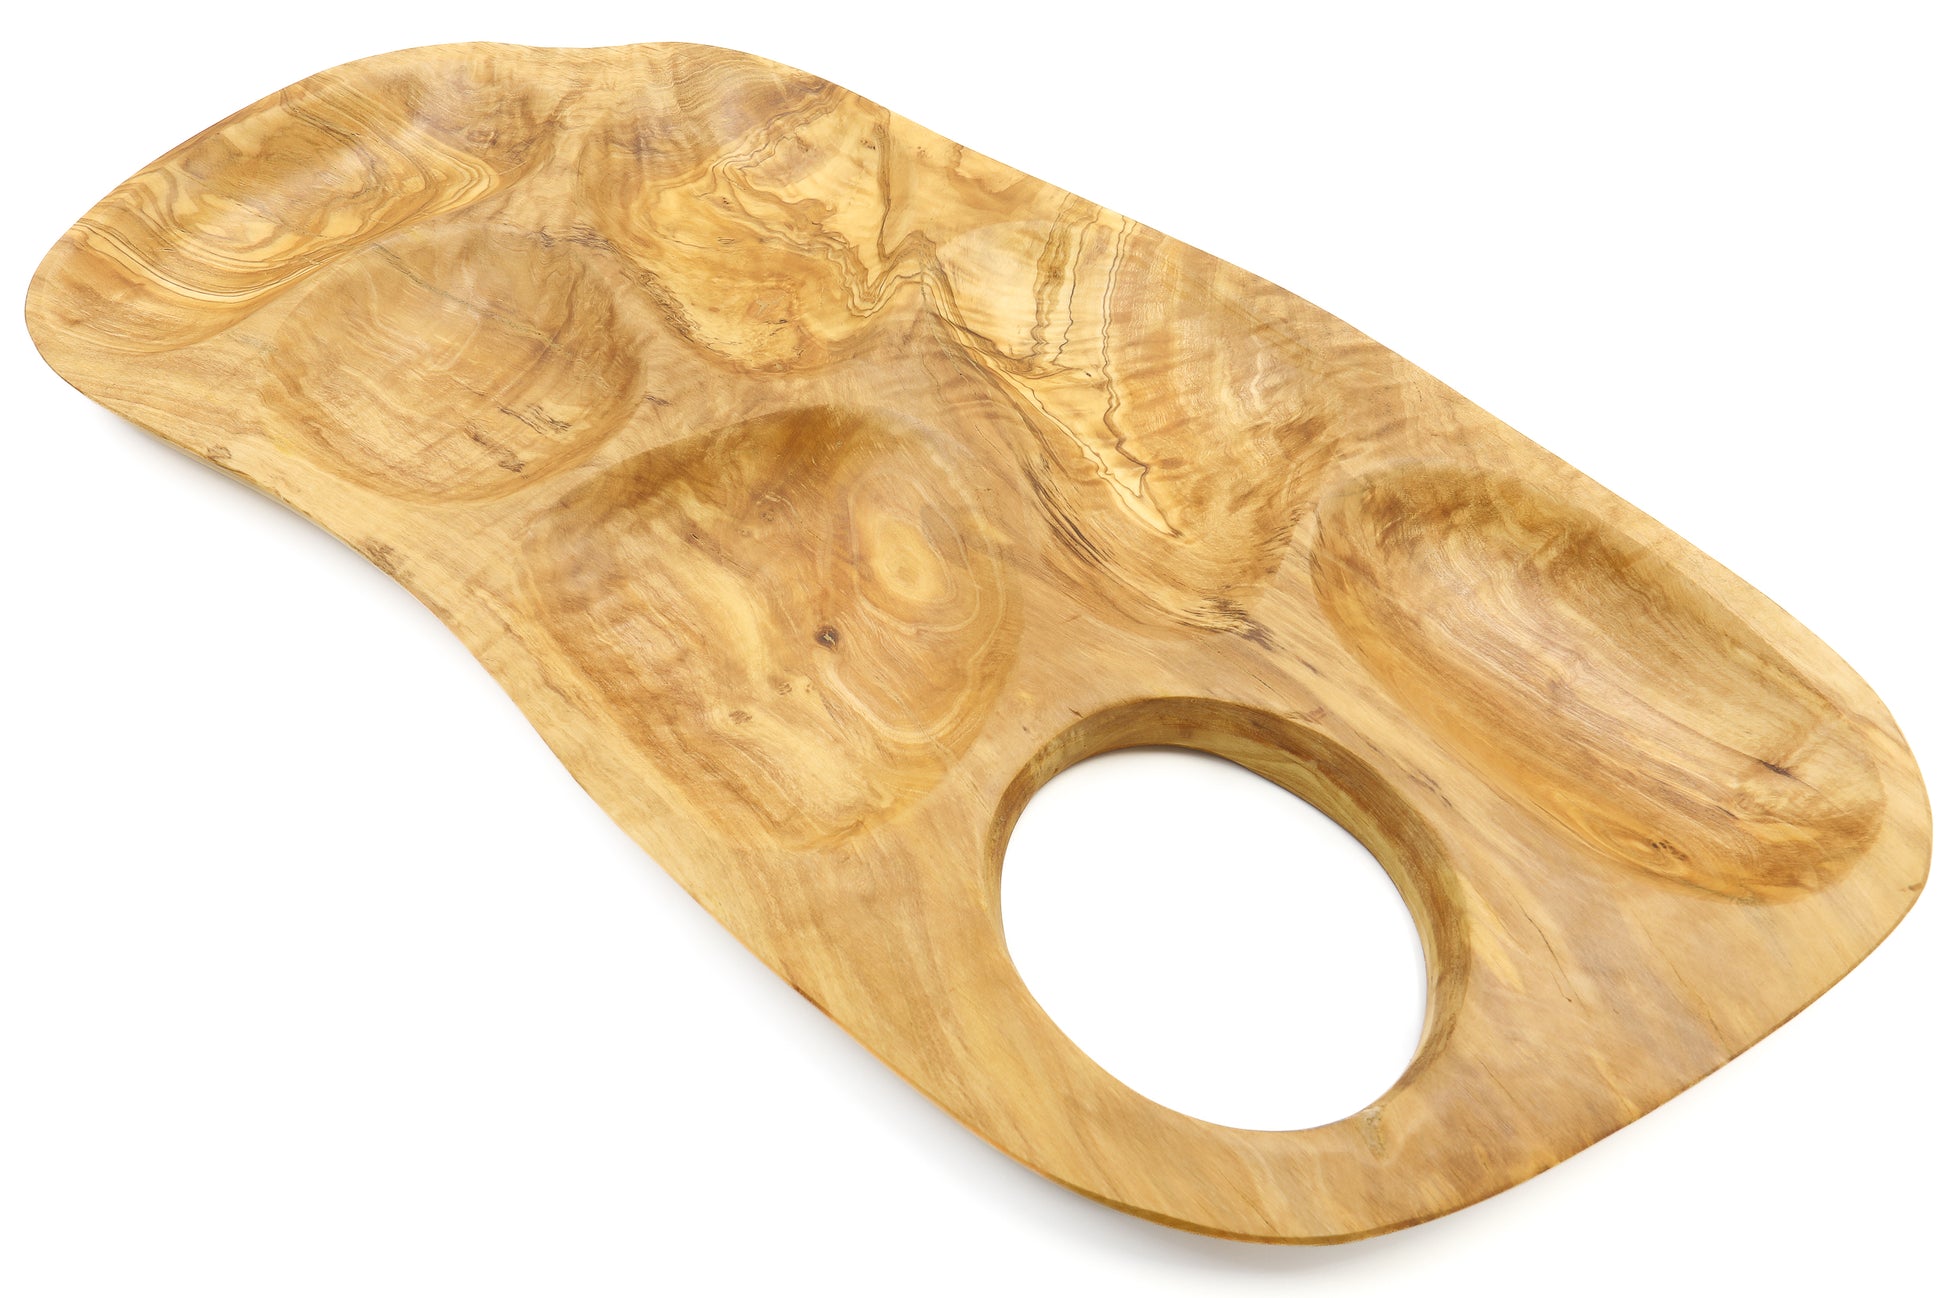 Natural olive wood appetizer tray for your special occasions